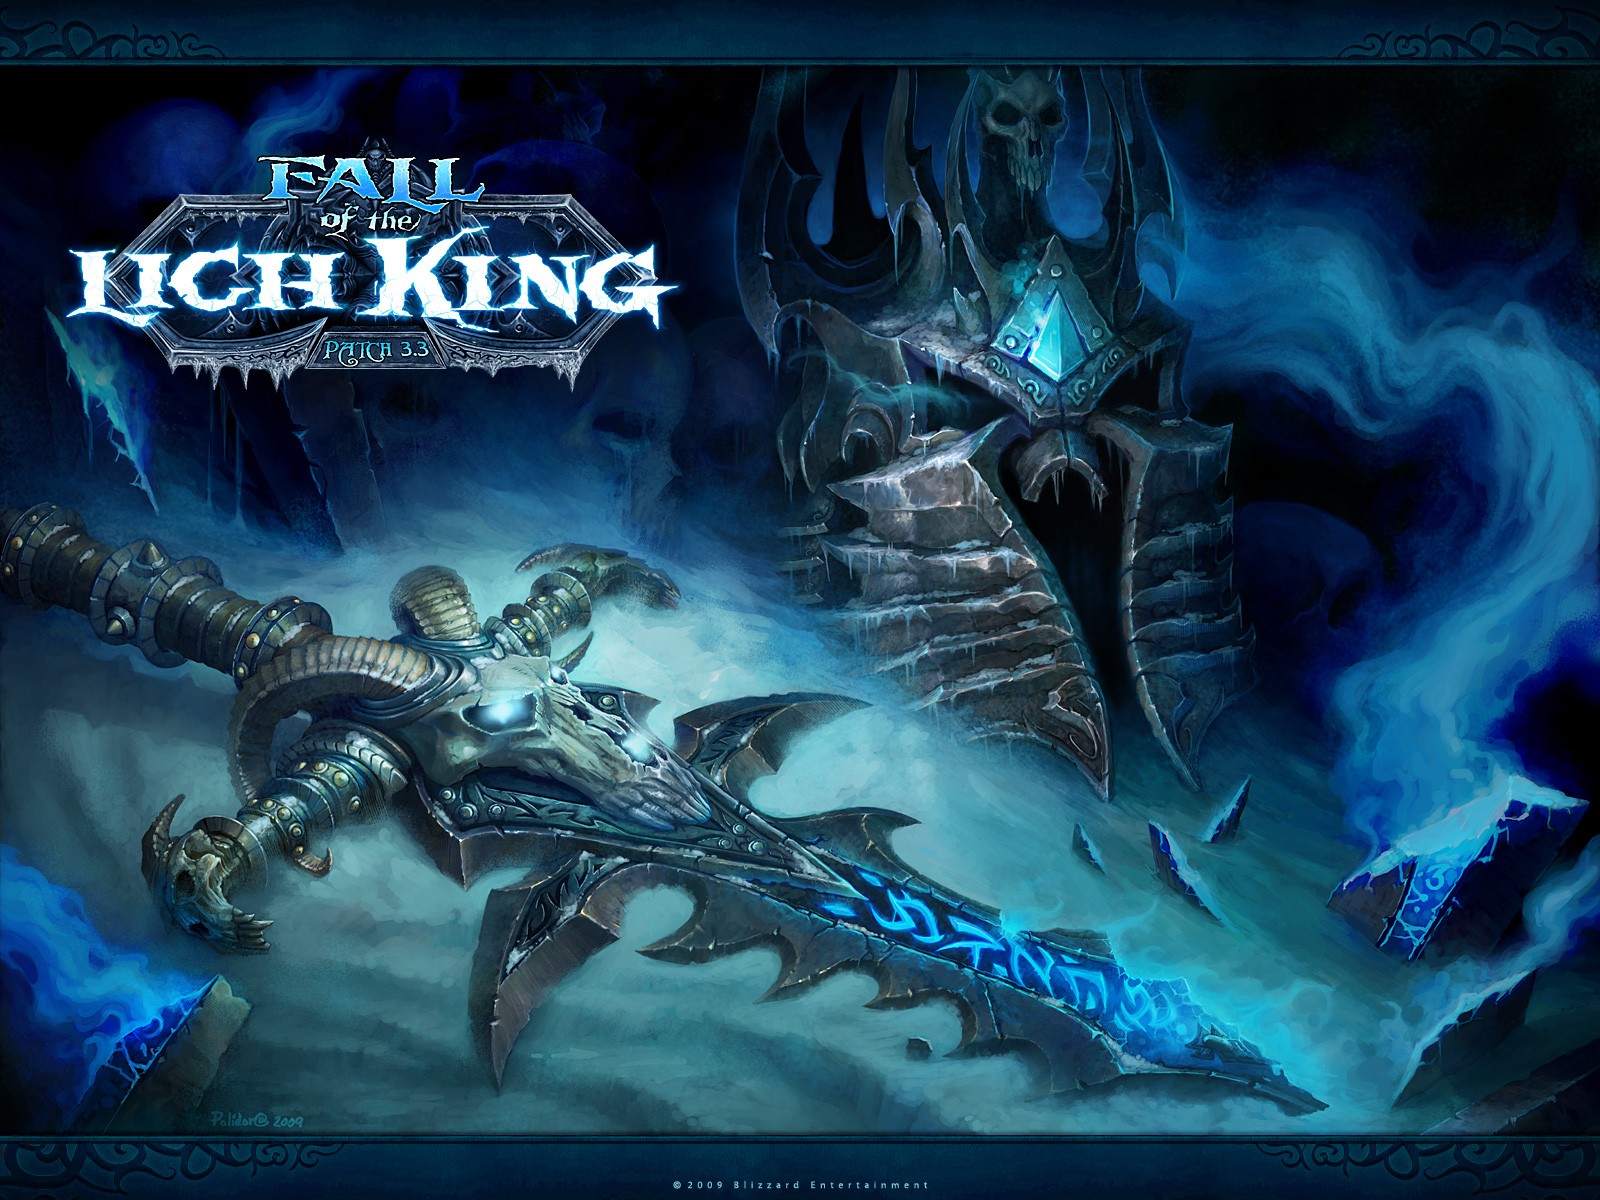 General 1600x1200 World of Warcraft: Wrath of the Lich King World of Warcraft Lich King Warcraft video games PC gaming 2009 (Year) Blizzard Entertainment